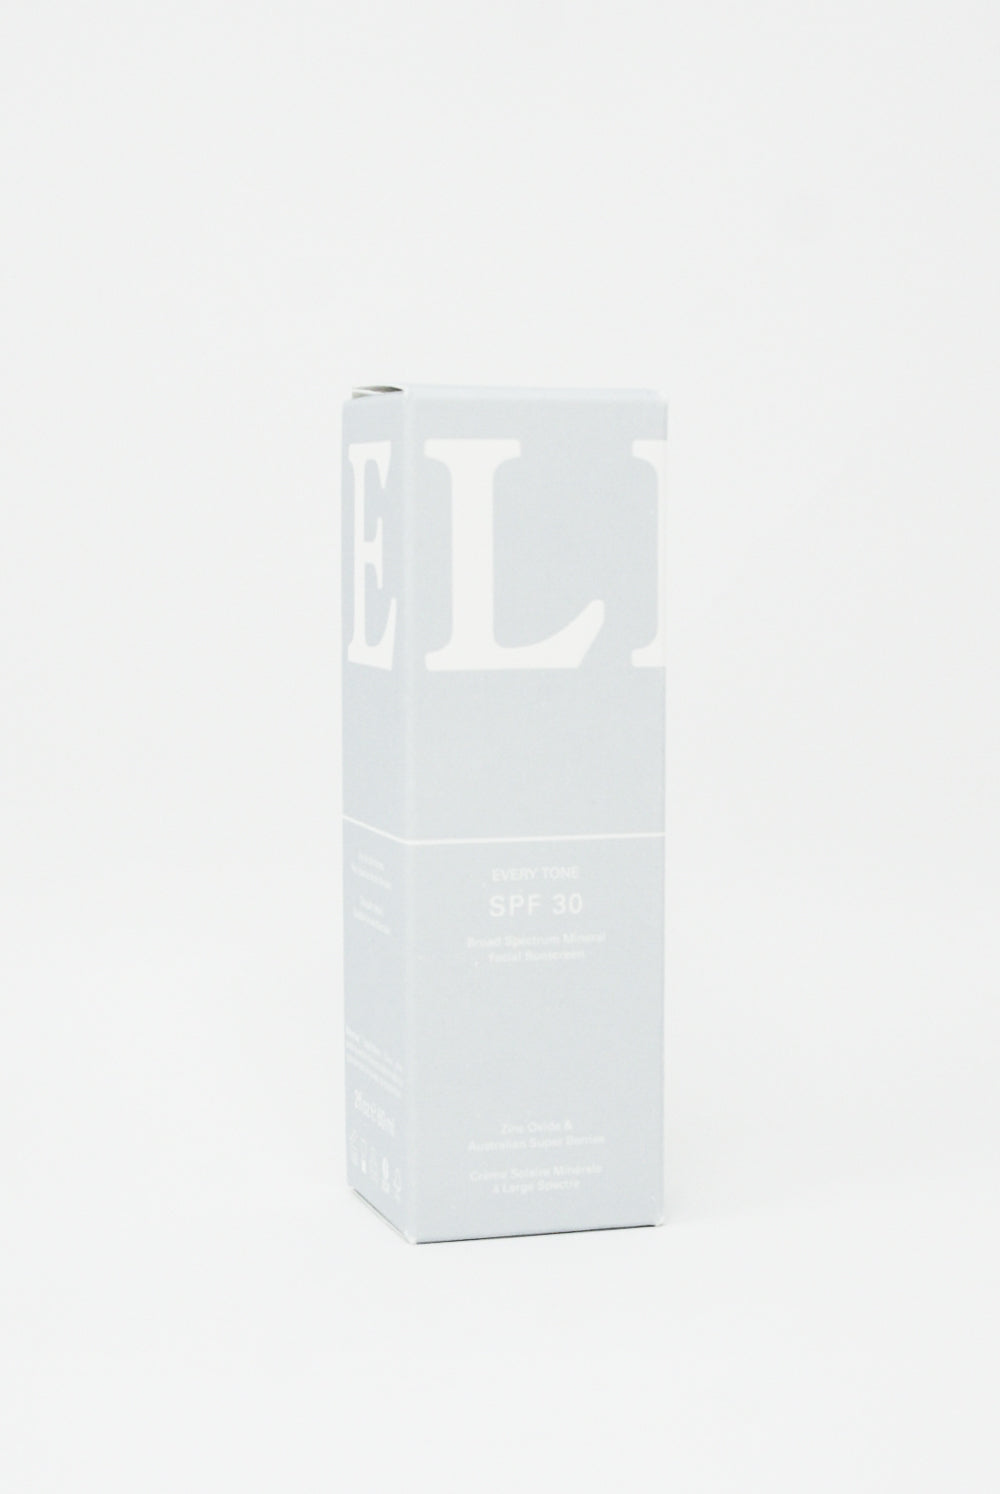 Lesse - Every tone SPF 30 Sunscreen -  2 fl oz/60 ml packaging view